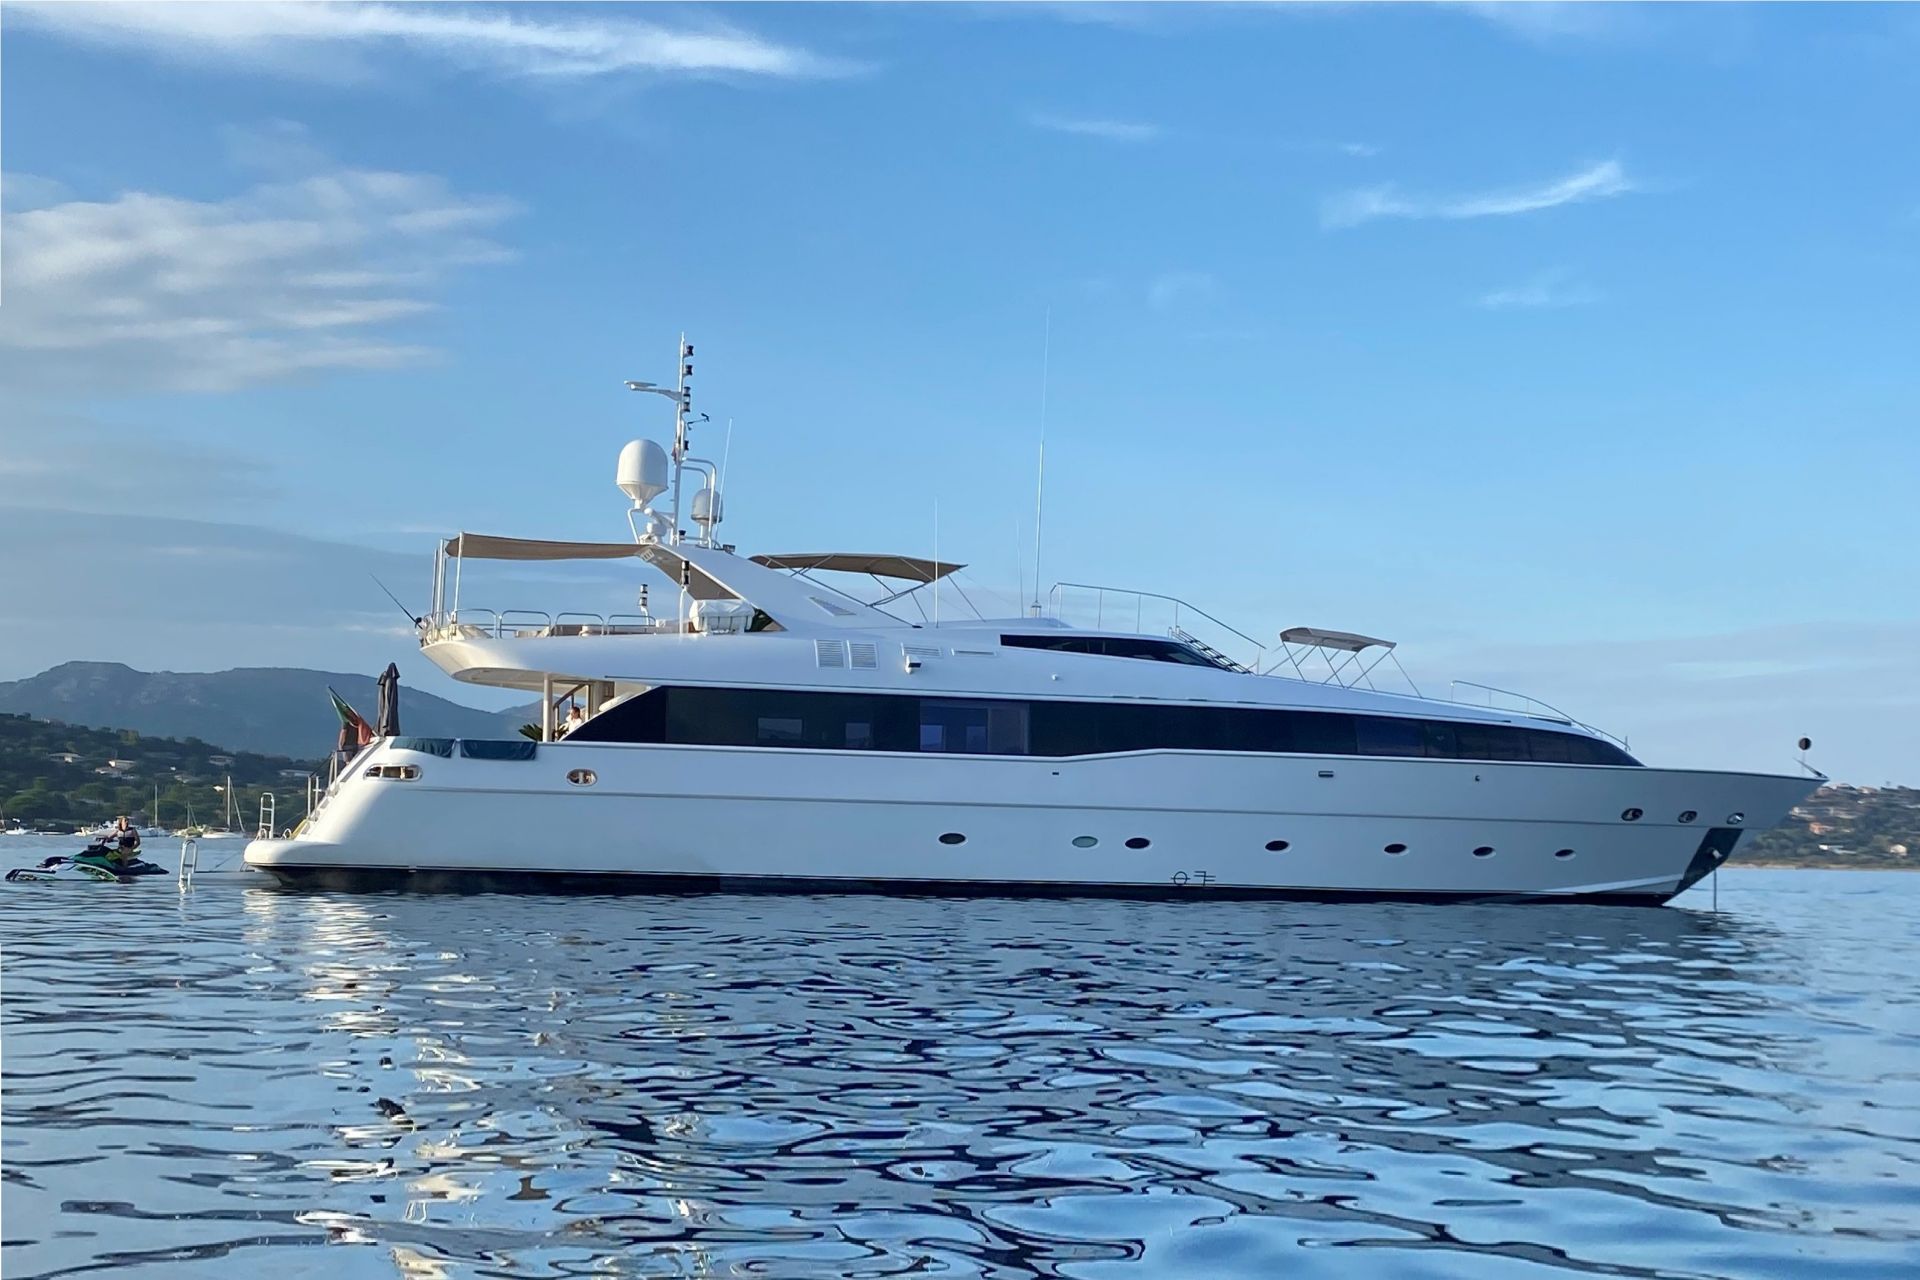 Motor yacht PALM B now available to buy with crypto through BitPay